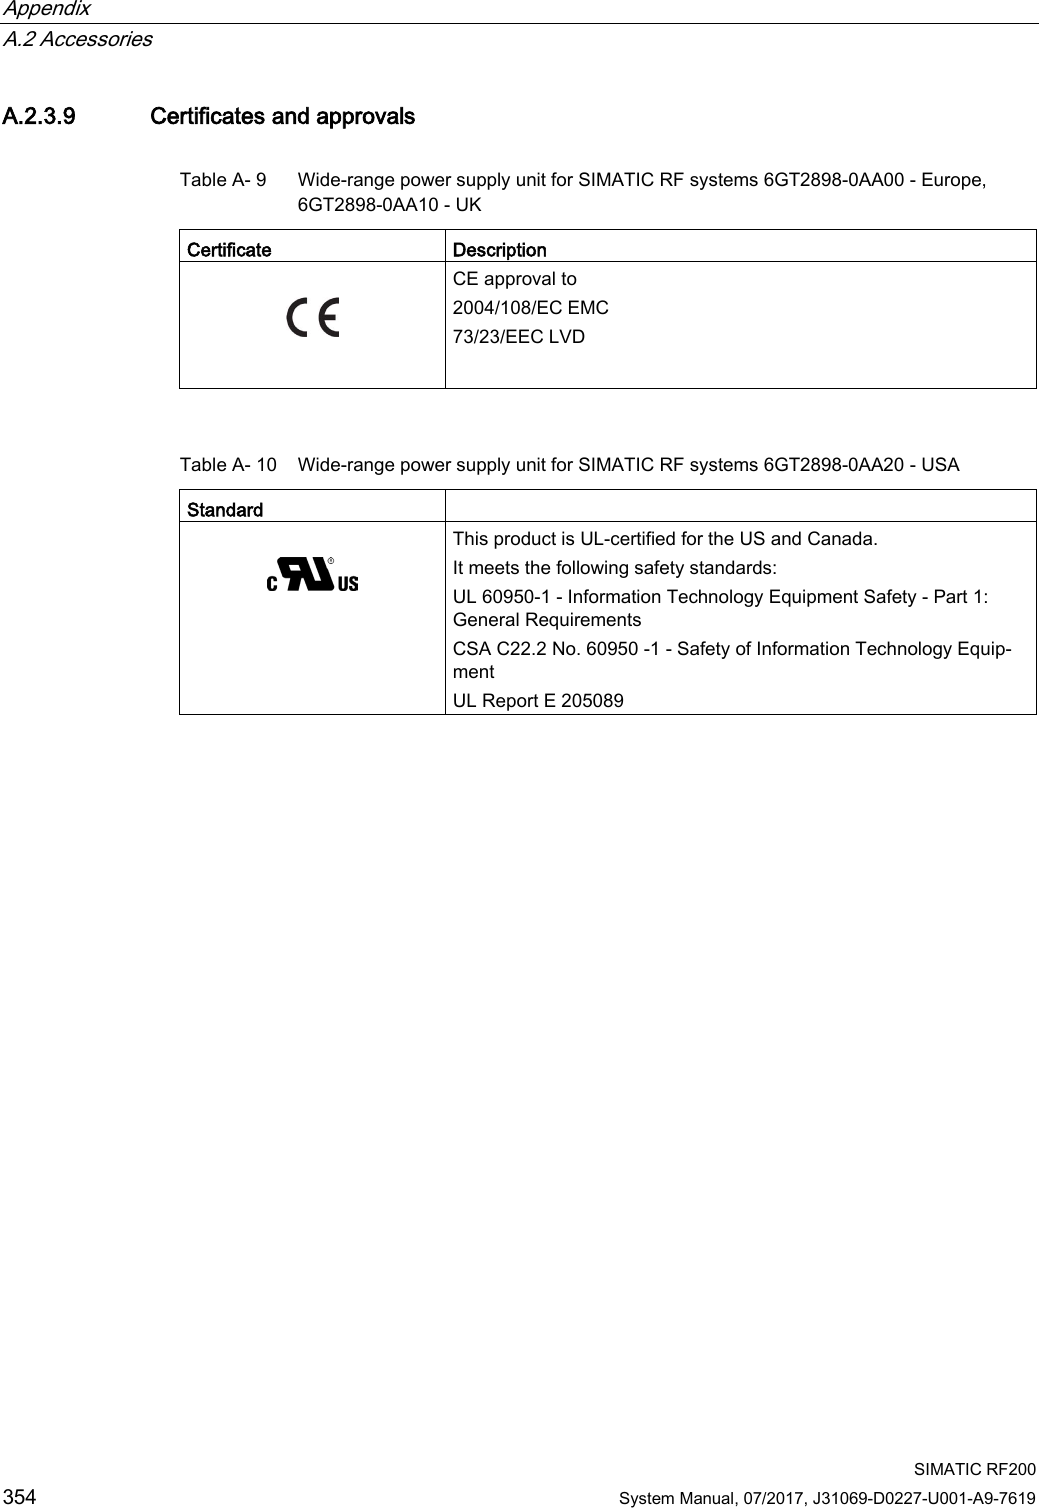 Appendix   A.2 Accessories  SIMATIC RF200 354 System Manual, 07/2017, J31069-D0227-U001-A9-7619 A.2.3.9 Certificates and approvals Table A- 9  Wide-range power supply unit for SIMATIC RF systems 6GT2898-0AA00 - Europe, 6GT2898-0AA10 - UK Certificate  Description     CE approval to  2004/108/EC EMC 73/23/EEC LVD  Table A- 10 Wide-range power supply unit for SIMATIC RF systems 6GT2898-0AA20 - USA Standard    This product is UL-certified for the US and Canada. It meets the following safety standards: UL 60950-1 - Information Technology Equipment Safety - Part 1: General Requirements CSA C22.2 No. 60950 -1 - Safety of Information Technology Equip-ment UL Report E 205089 